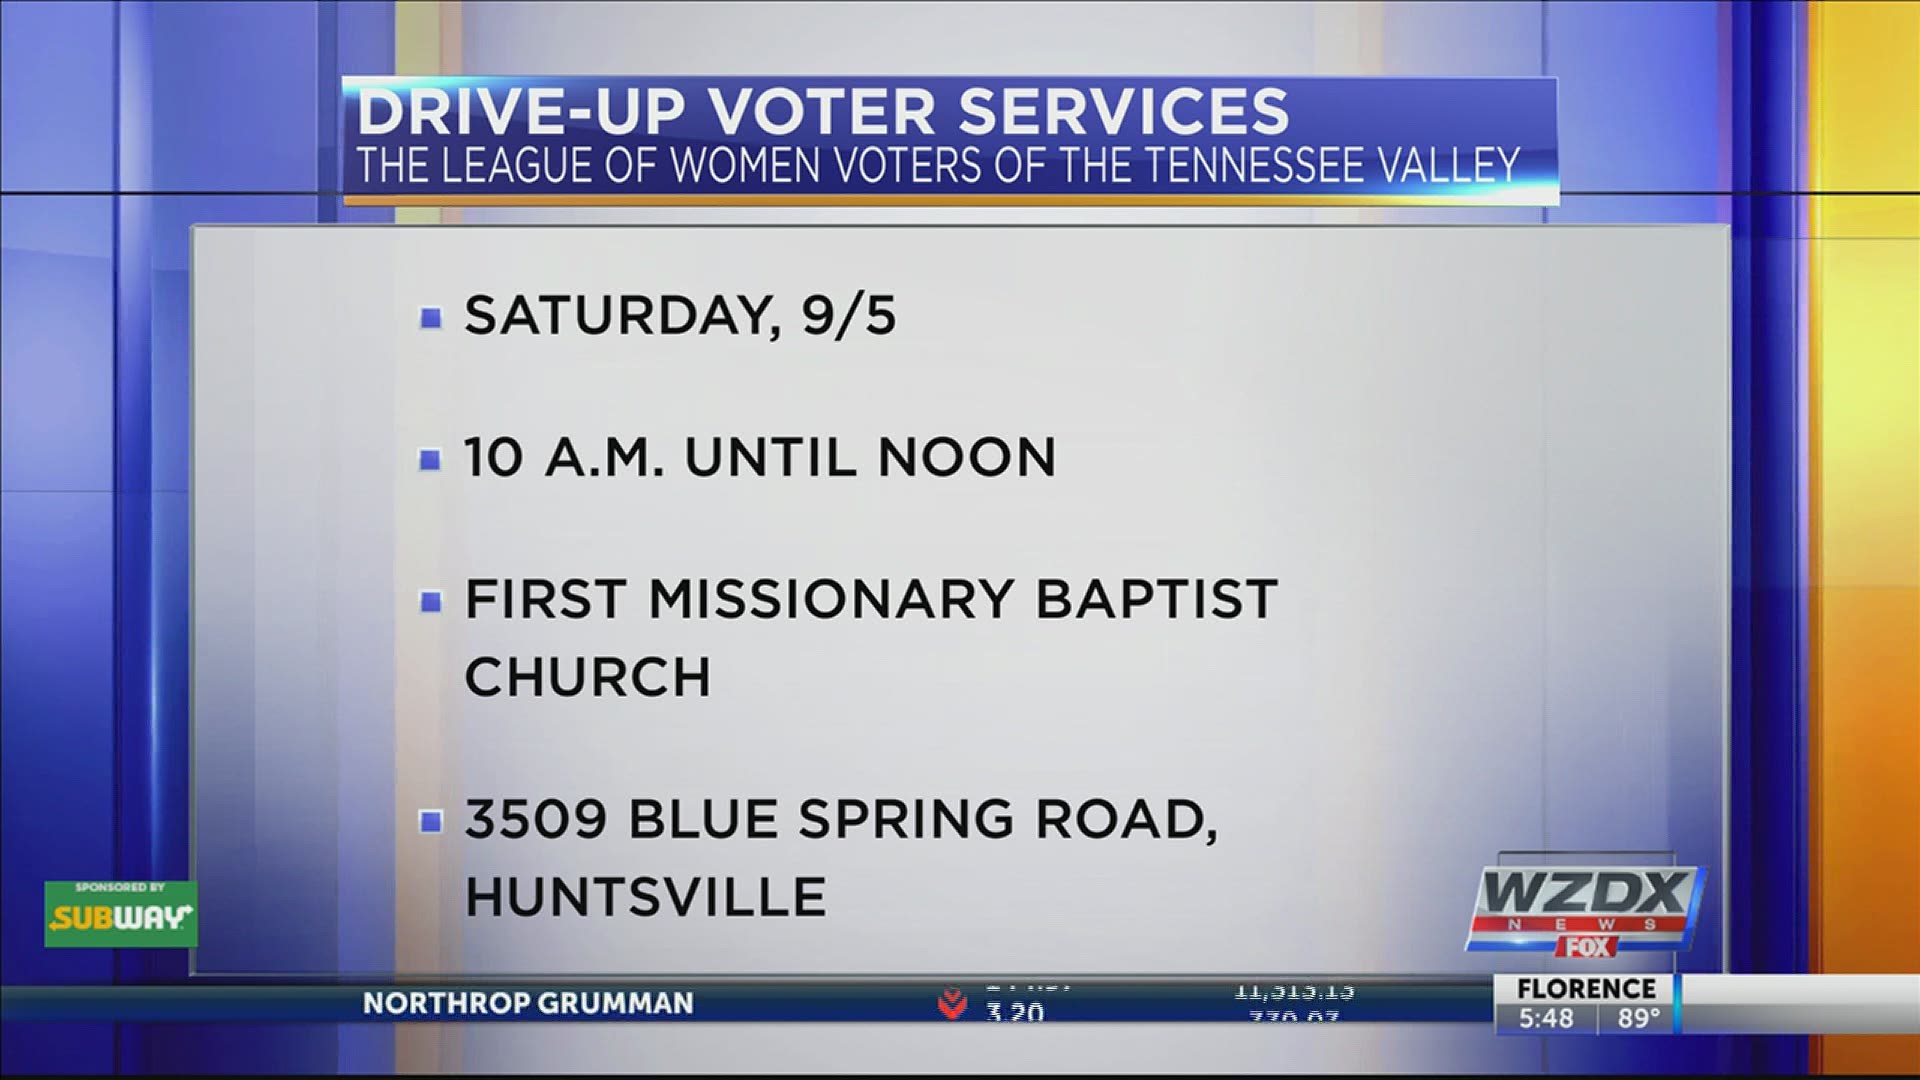 Get registered to vote and get your voting questions answered at Saturday's drive-up voter services clinic.